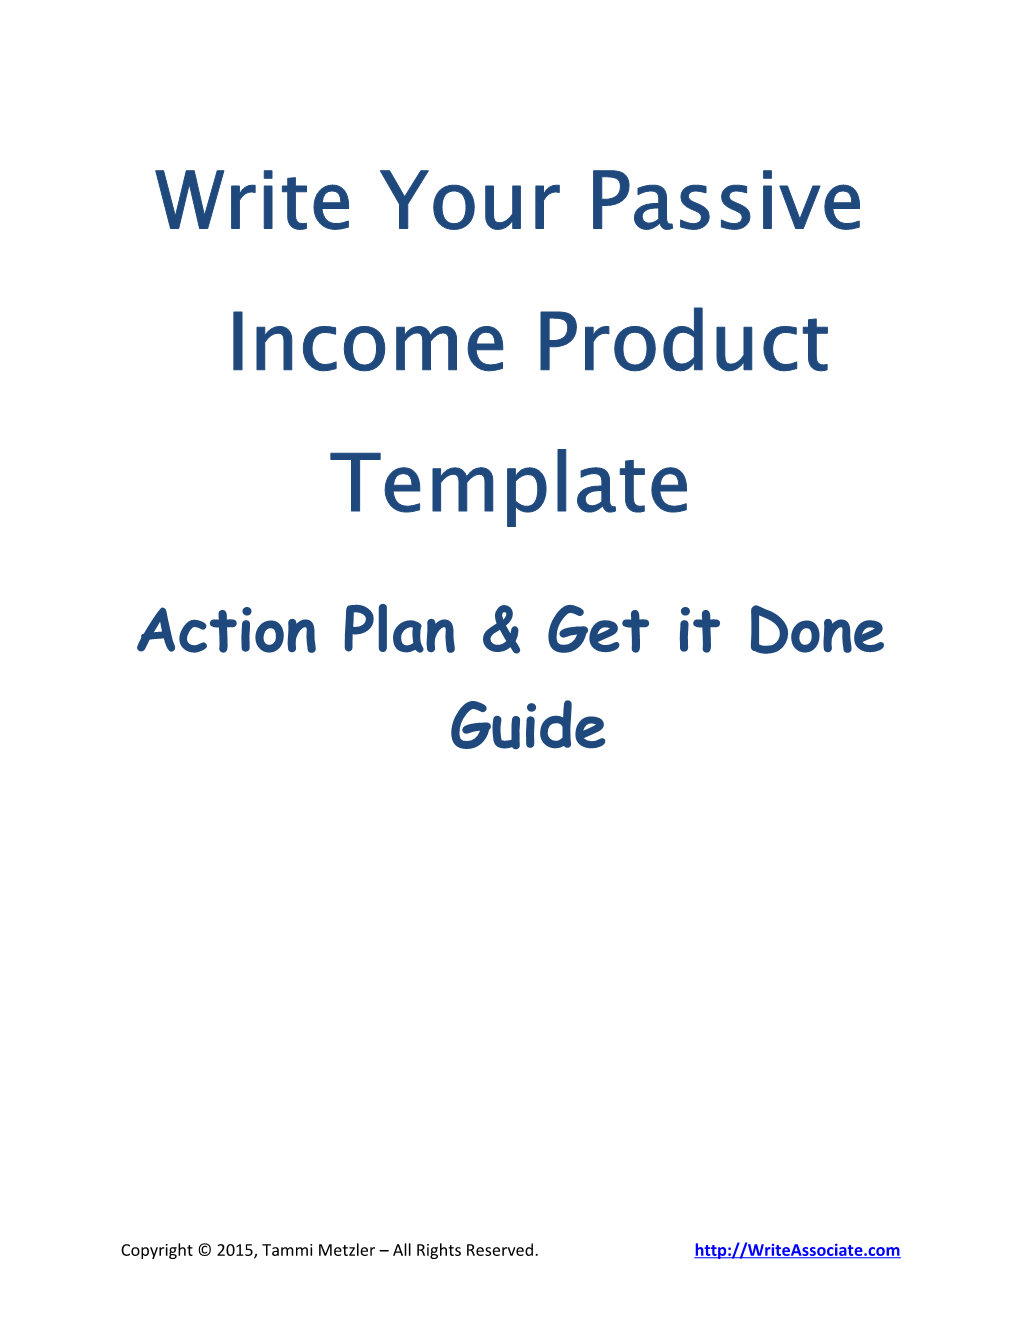 Write Your Passive Income Product Template